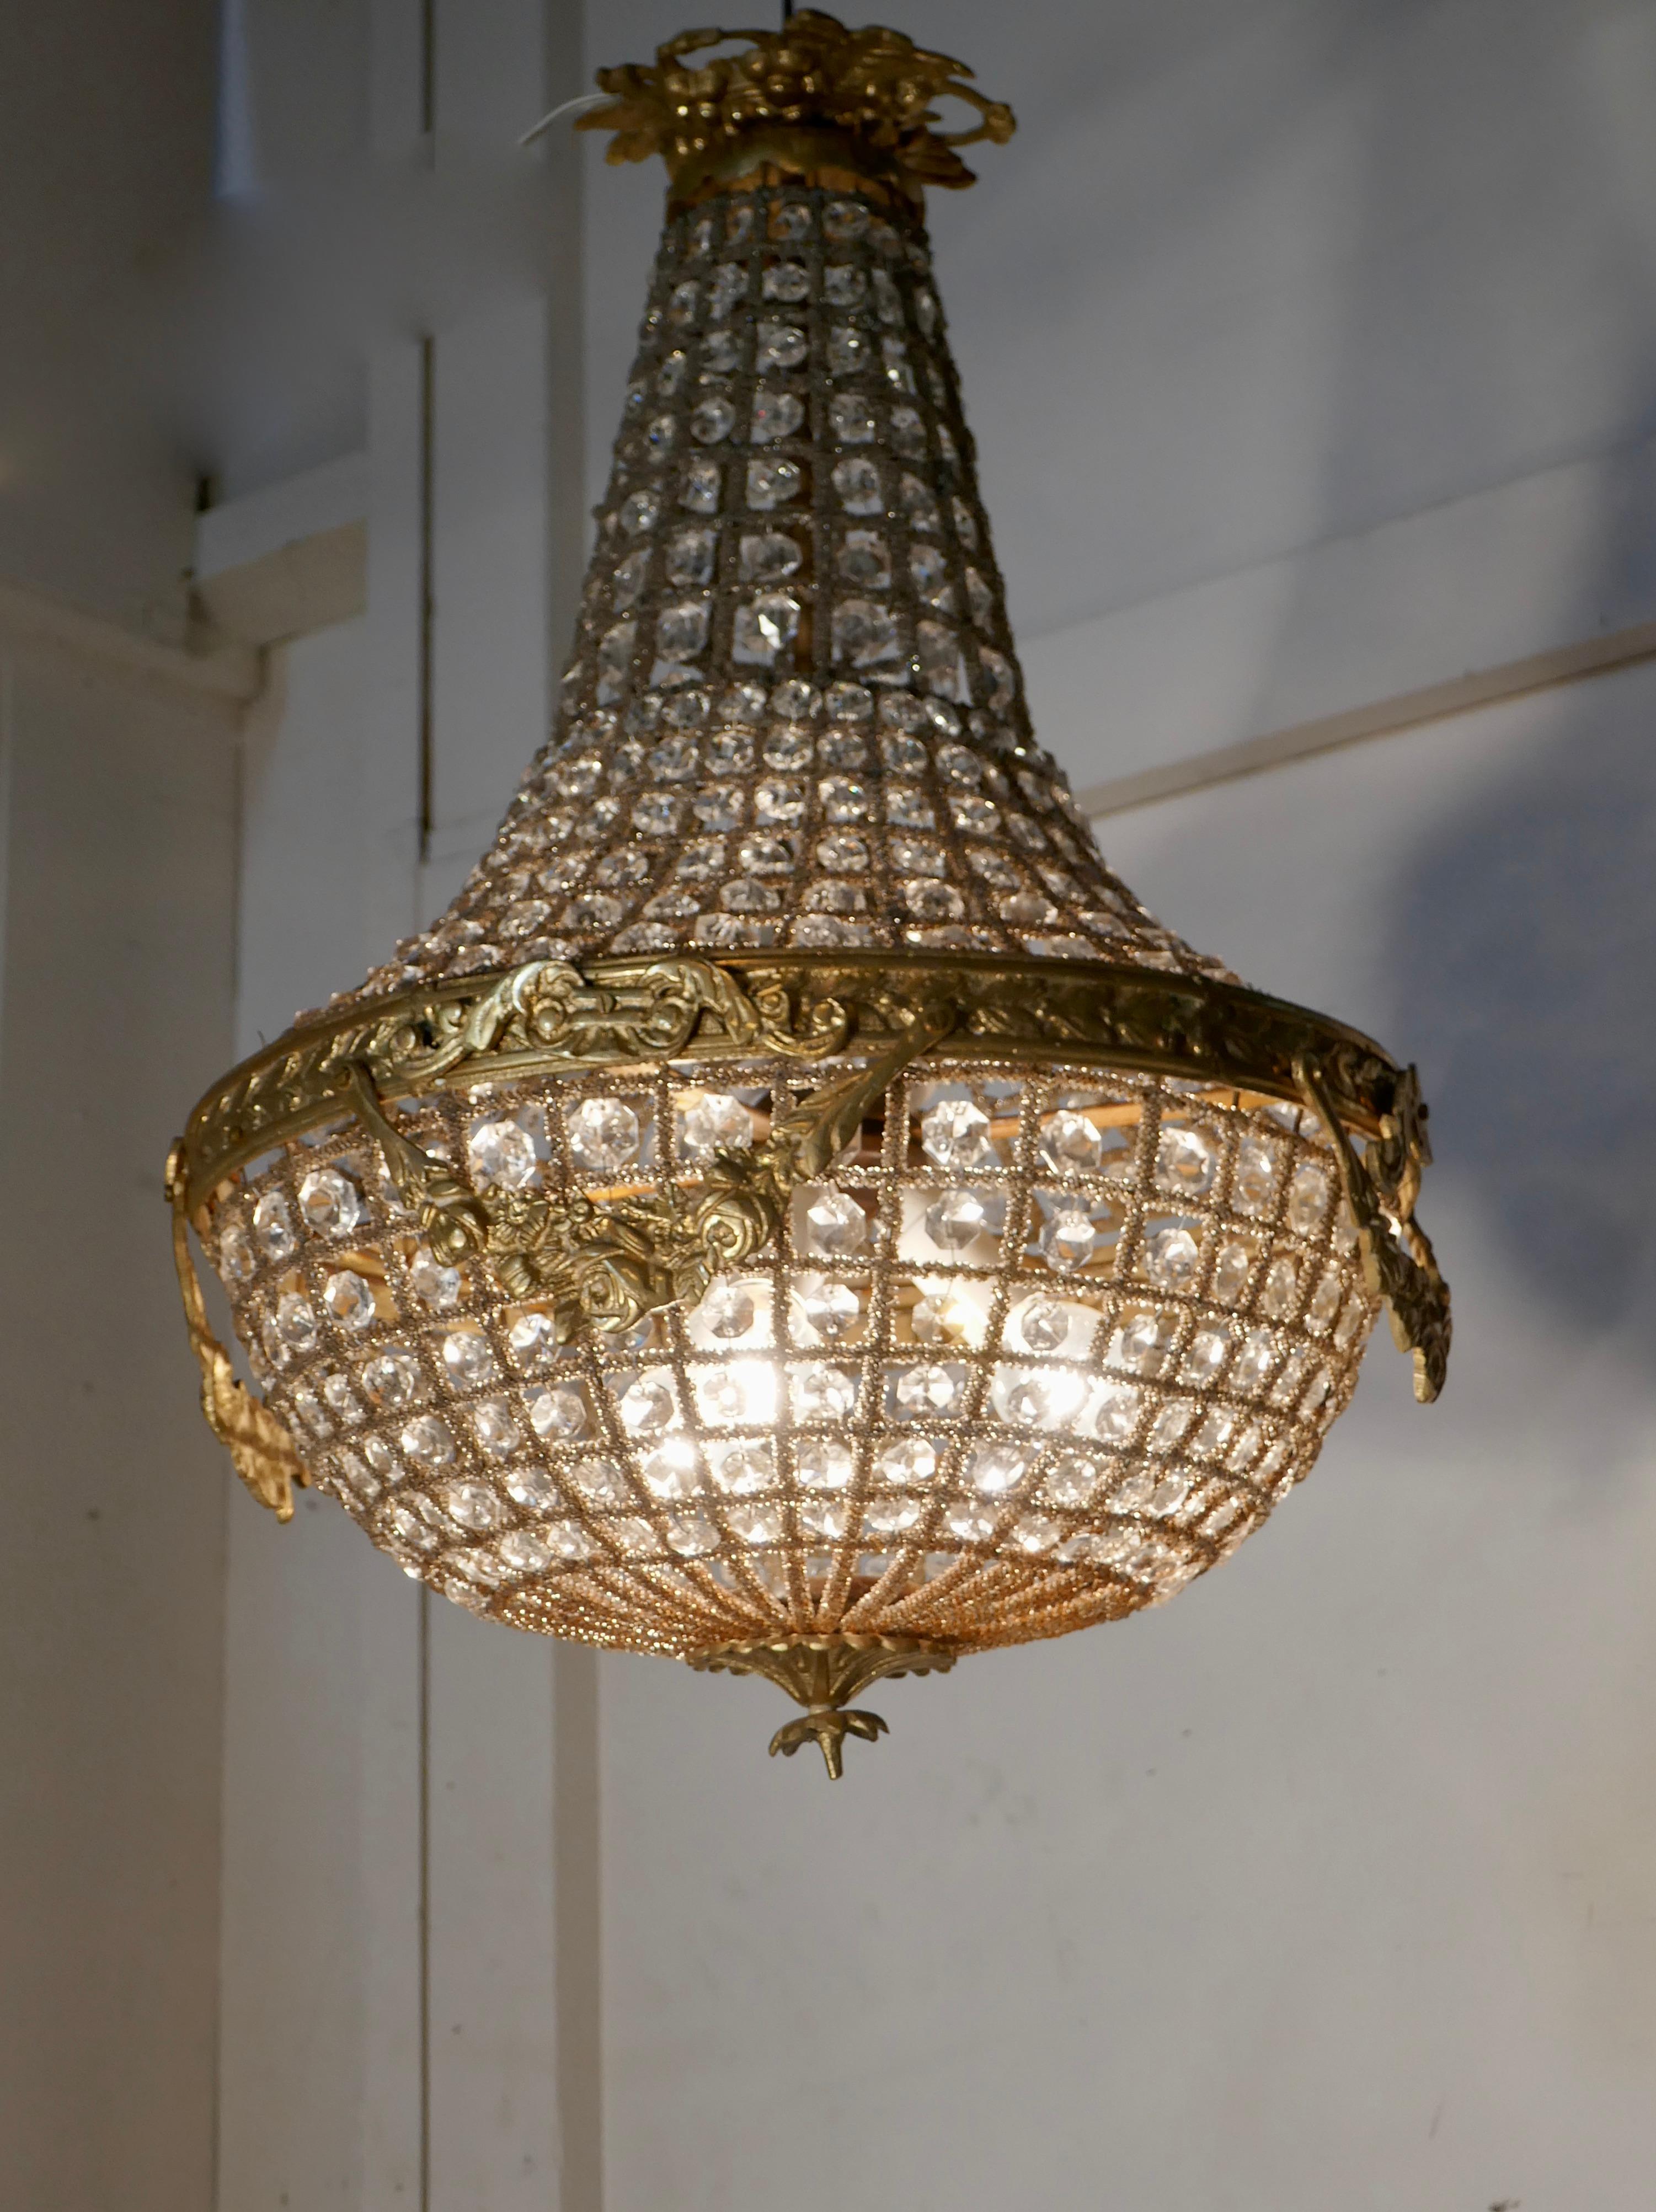 Large French Rocco style bag and tent chandelier

A fine piece, in age darkened brass and crystal, it has 3 bulbs giving a very attractive light

The brass frame is set with crystal stones, it is decorated with swags around the central rim